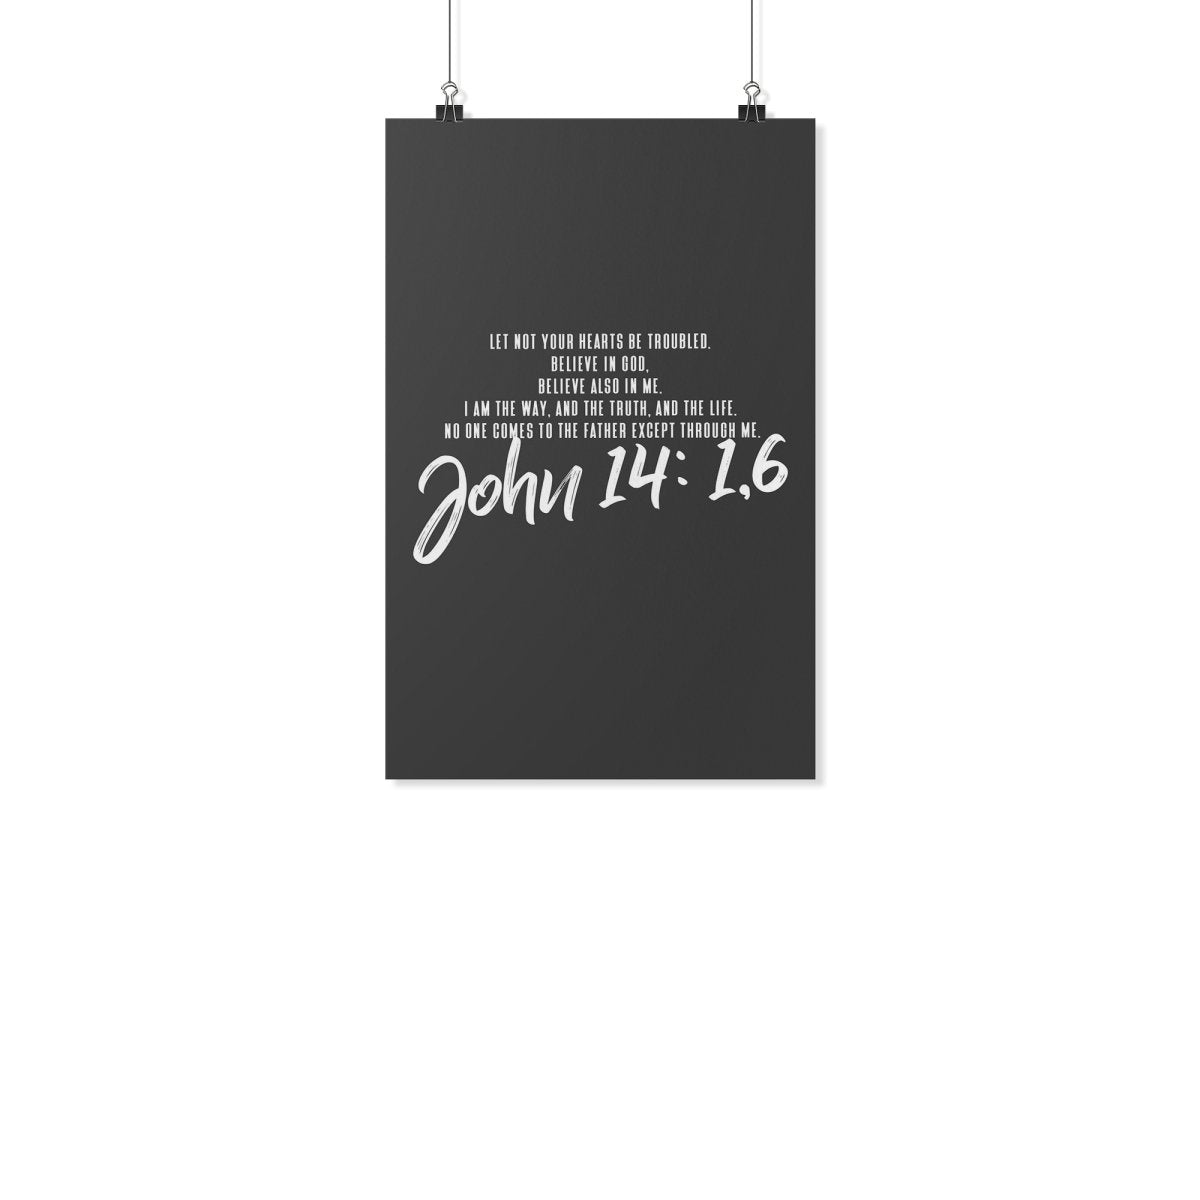 I Am the Way, the Truth and the Life (Wall Poster) - SDG Clothing